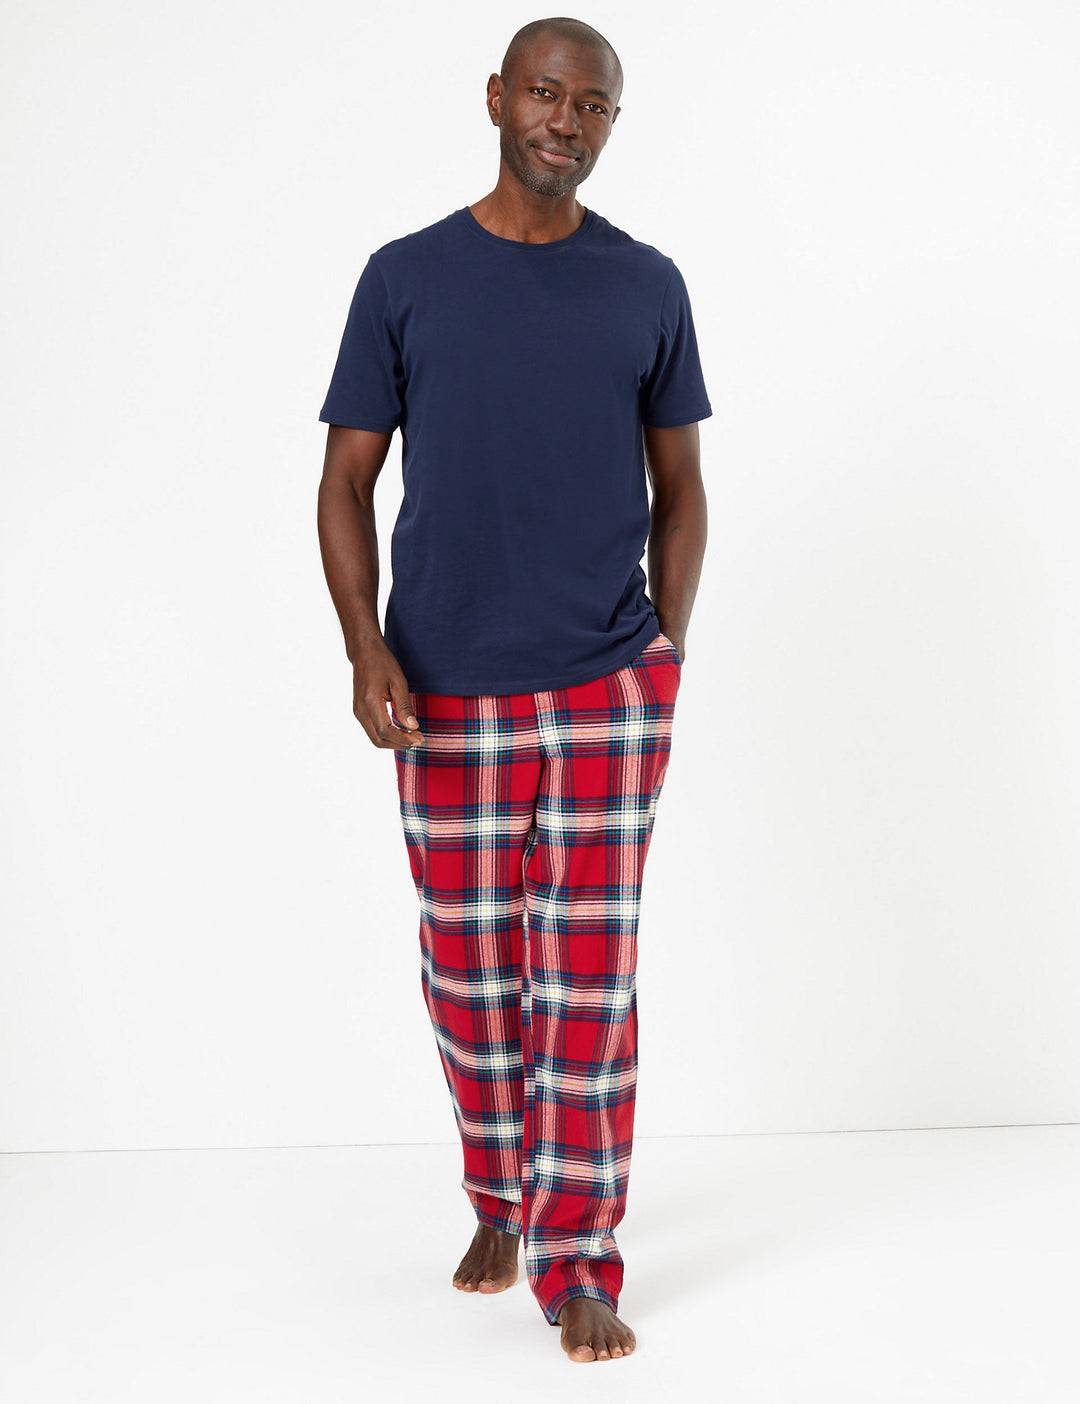 M&S Mens Knitted Check Cotton Pajama T07/3211